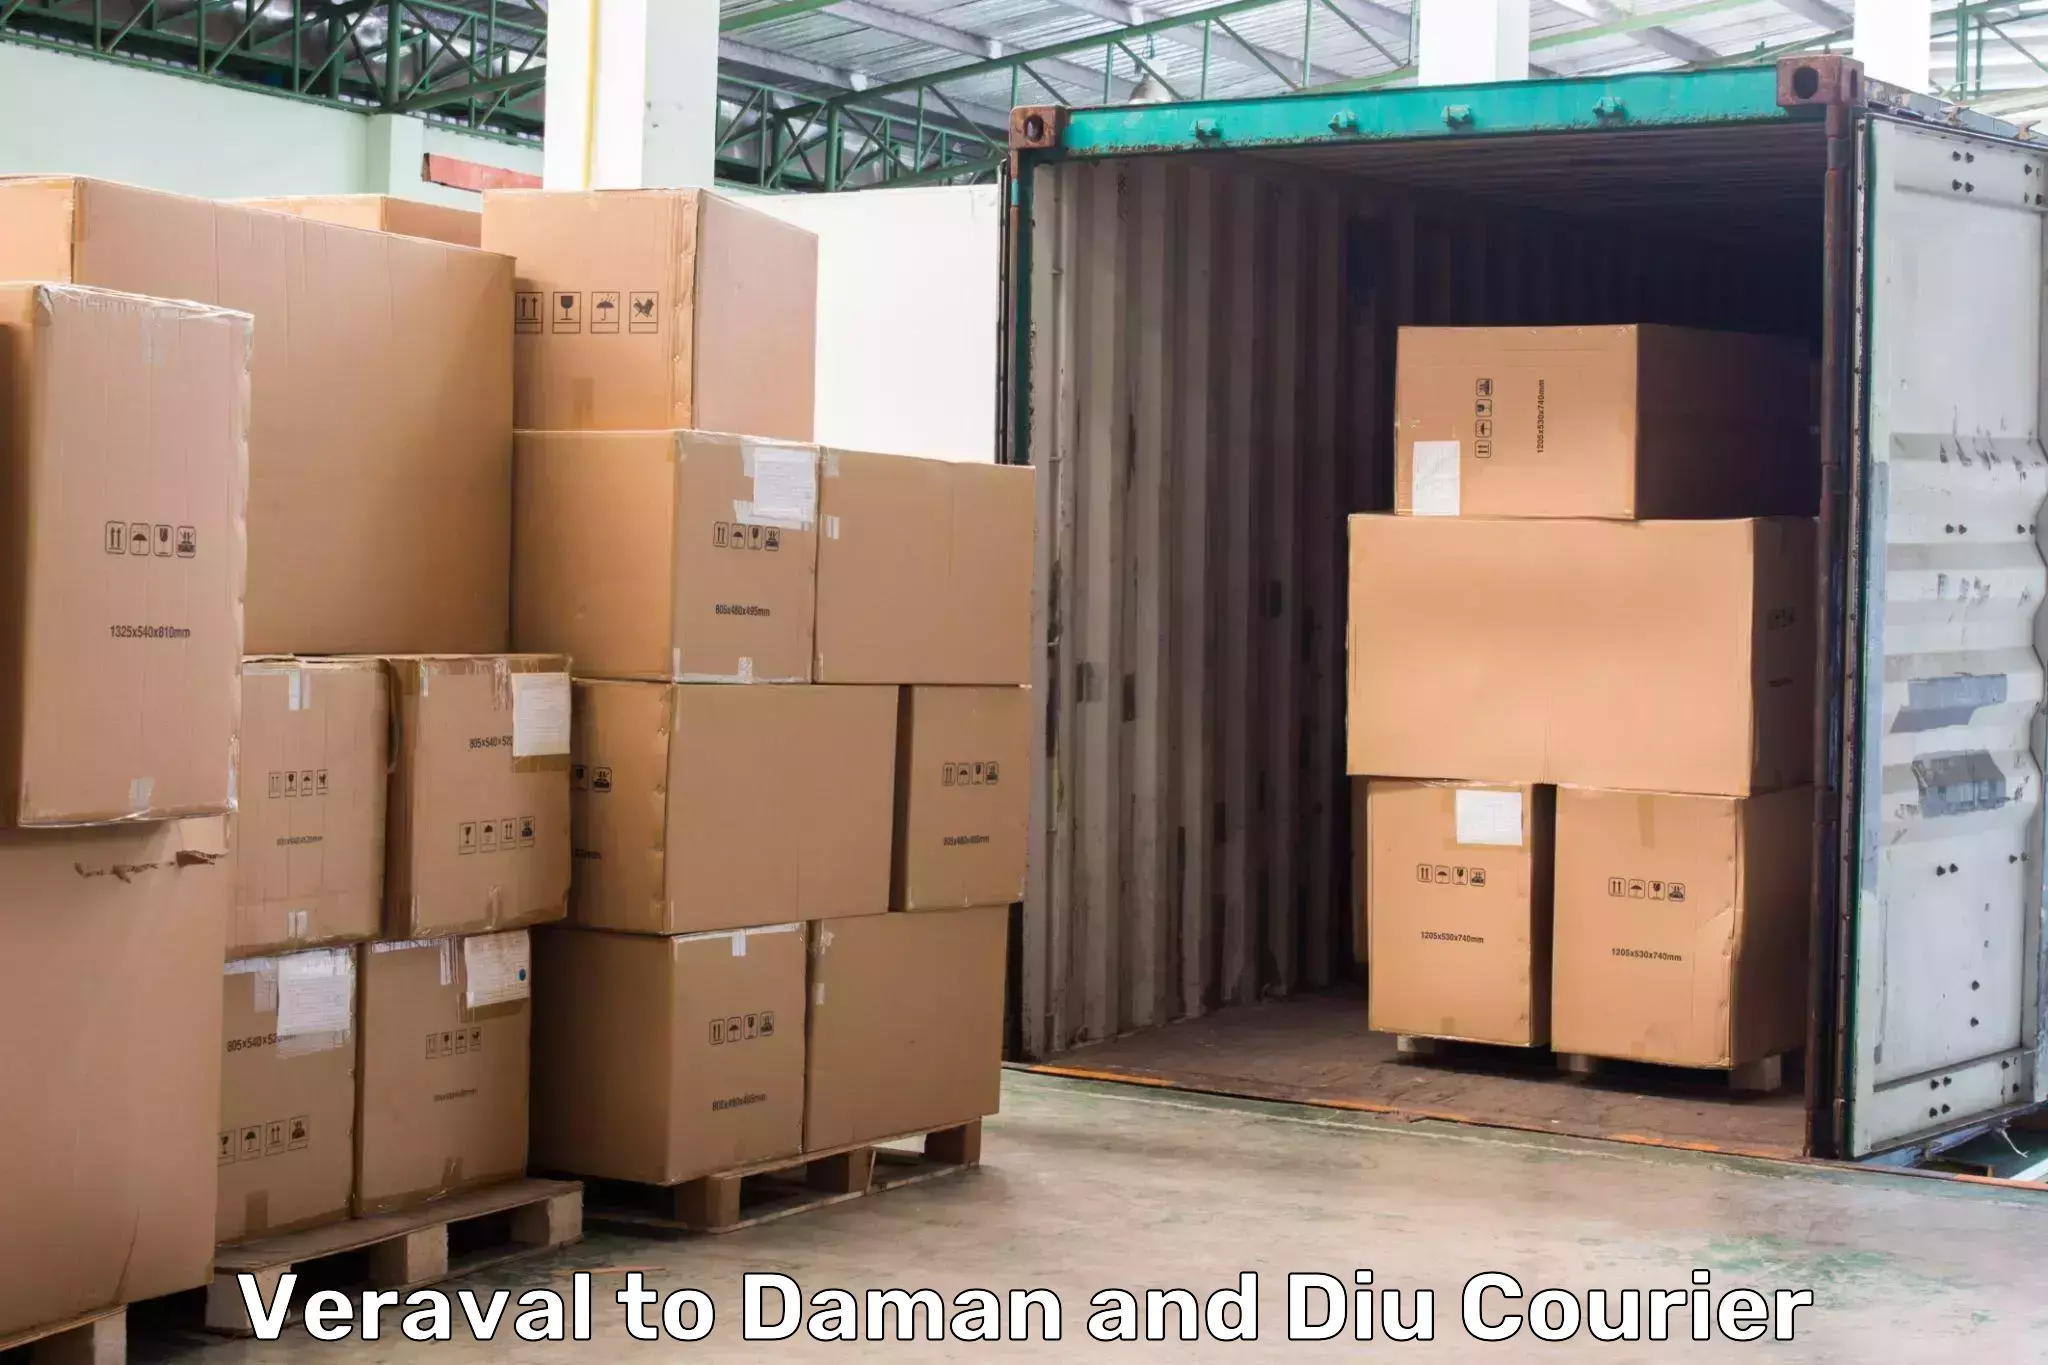 Advanced parcel tracking Veraval to Daman